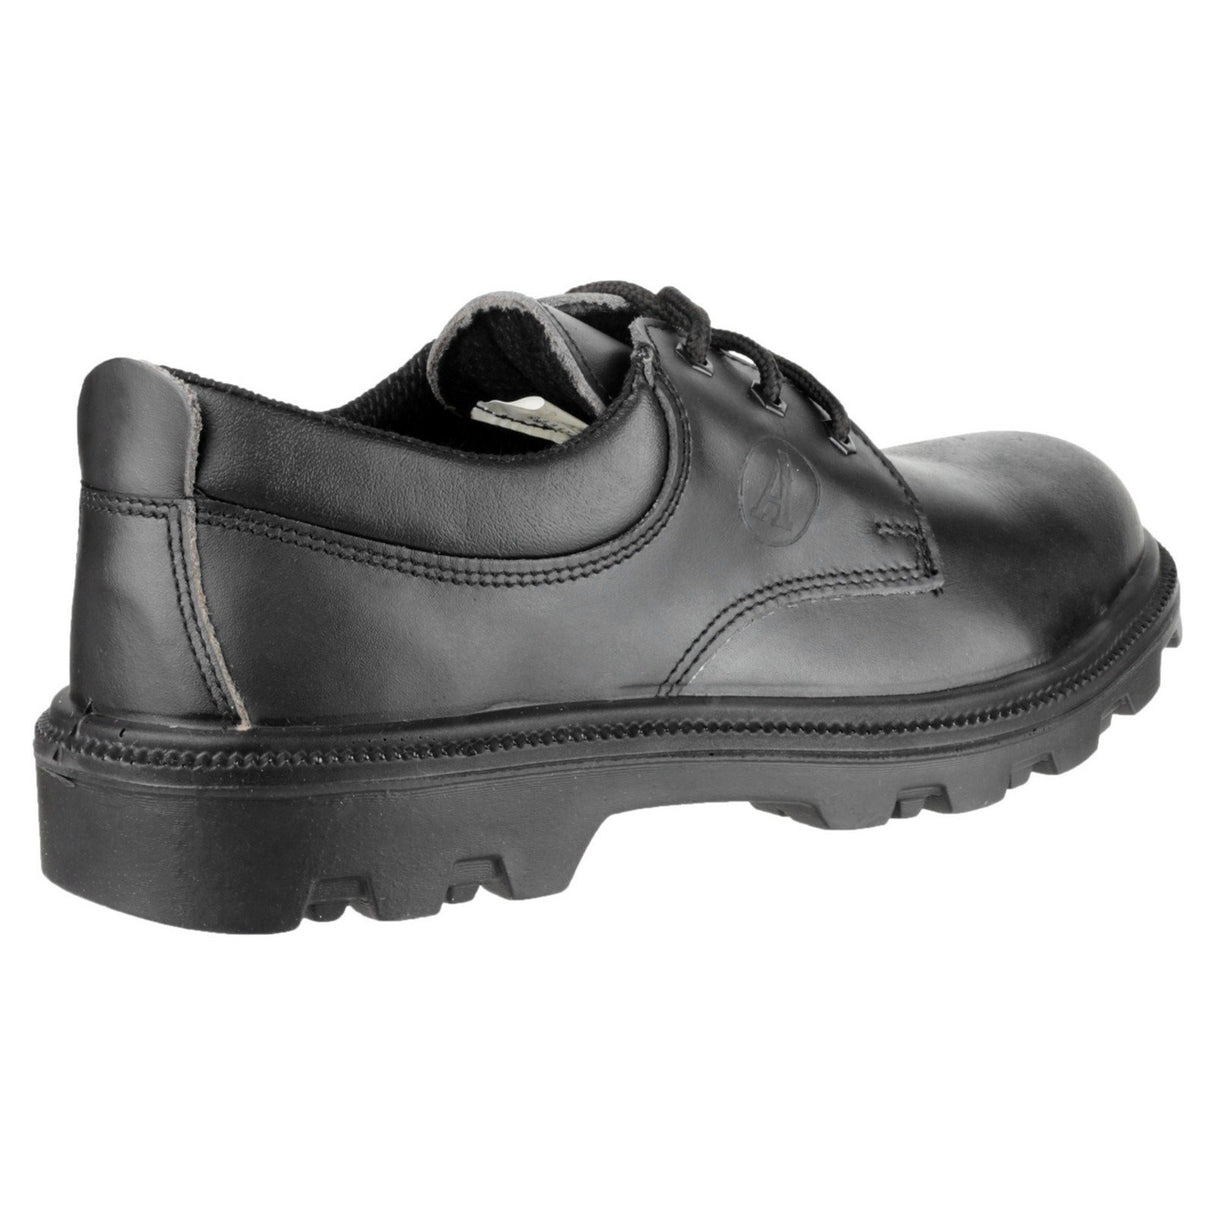 Amblers Safety Lace Up Non-Slip Safety Shoes